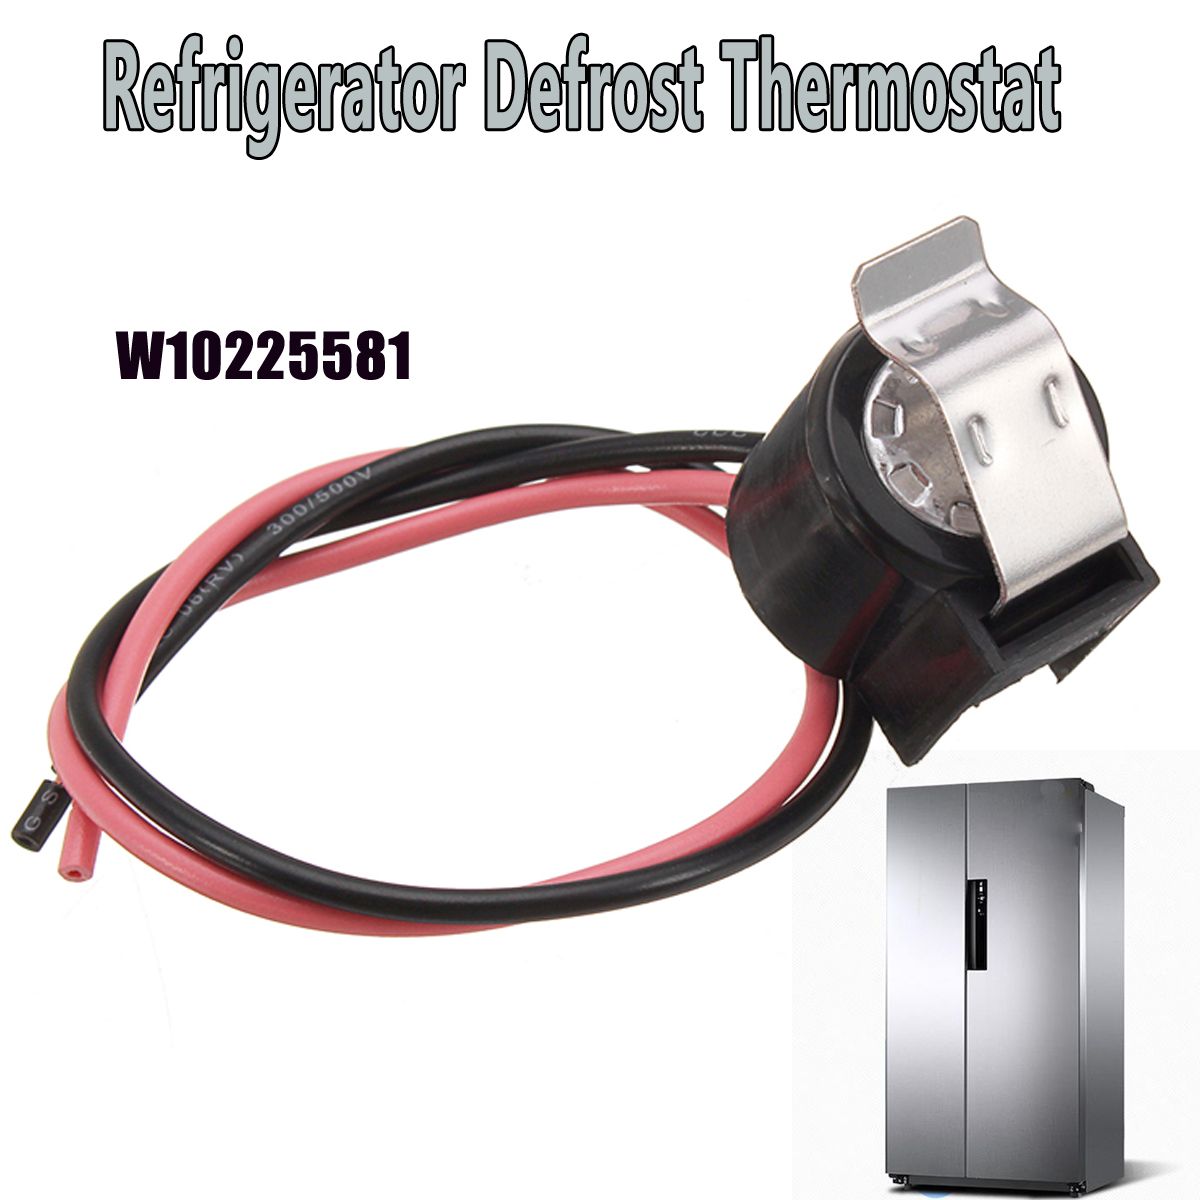 Refrigerator-Defrost-Thermostat-Replacement-For-Whirlpool-Kenmore-W10225581-1364764